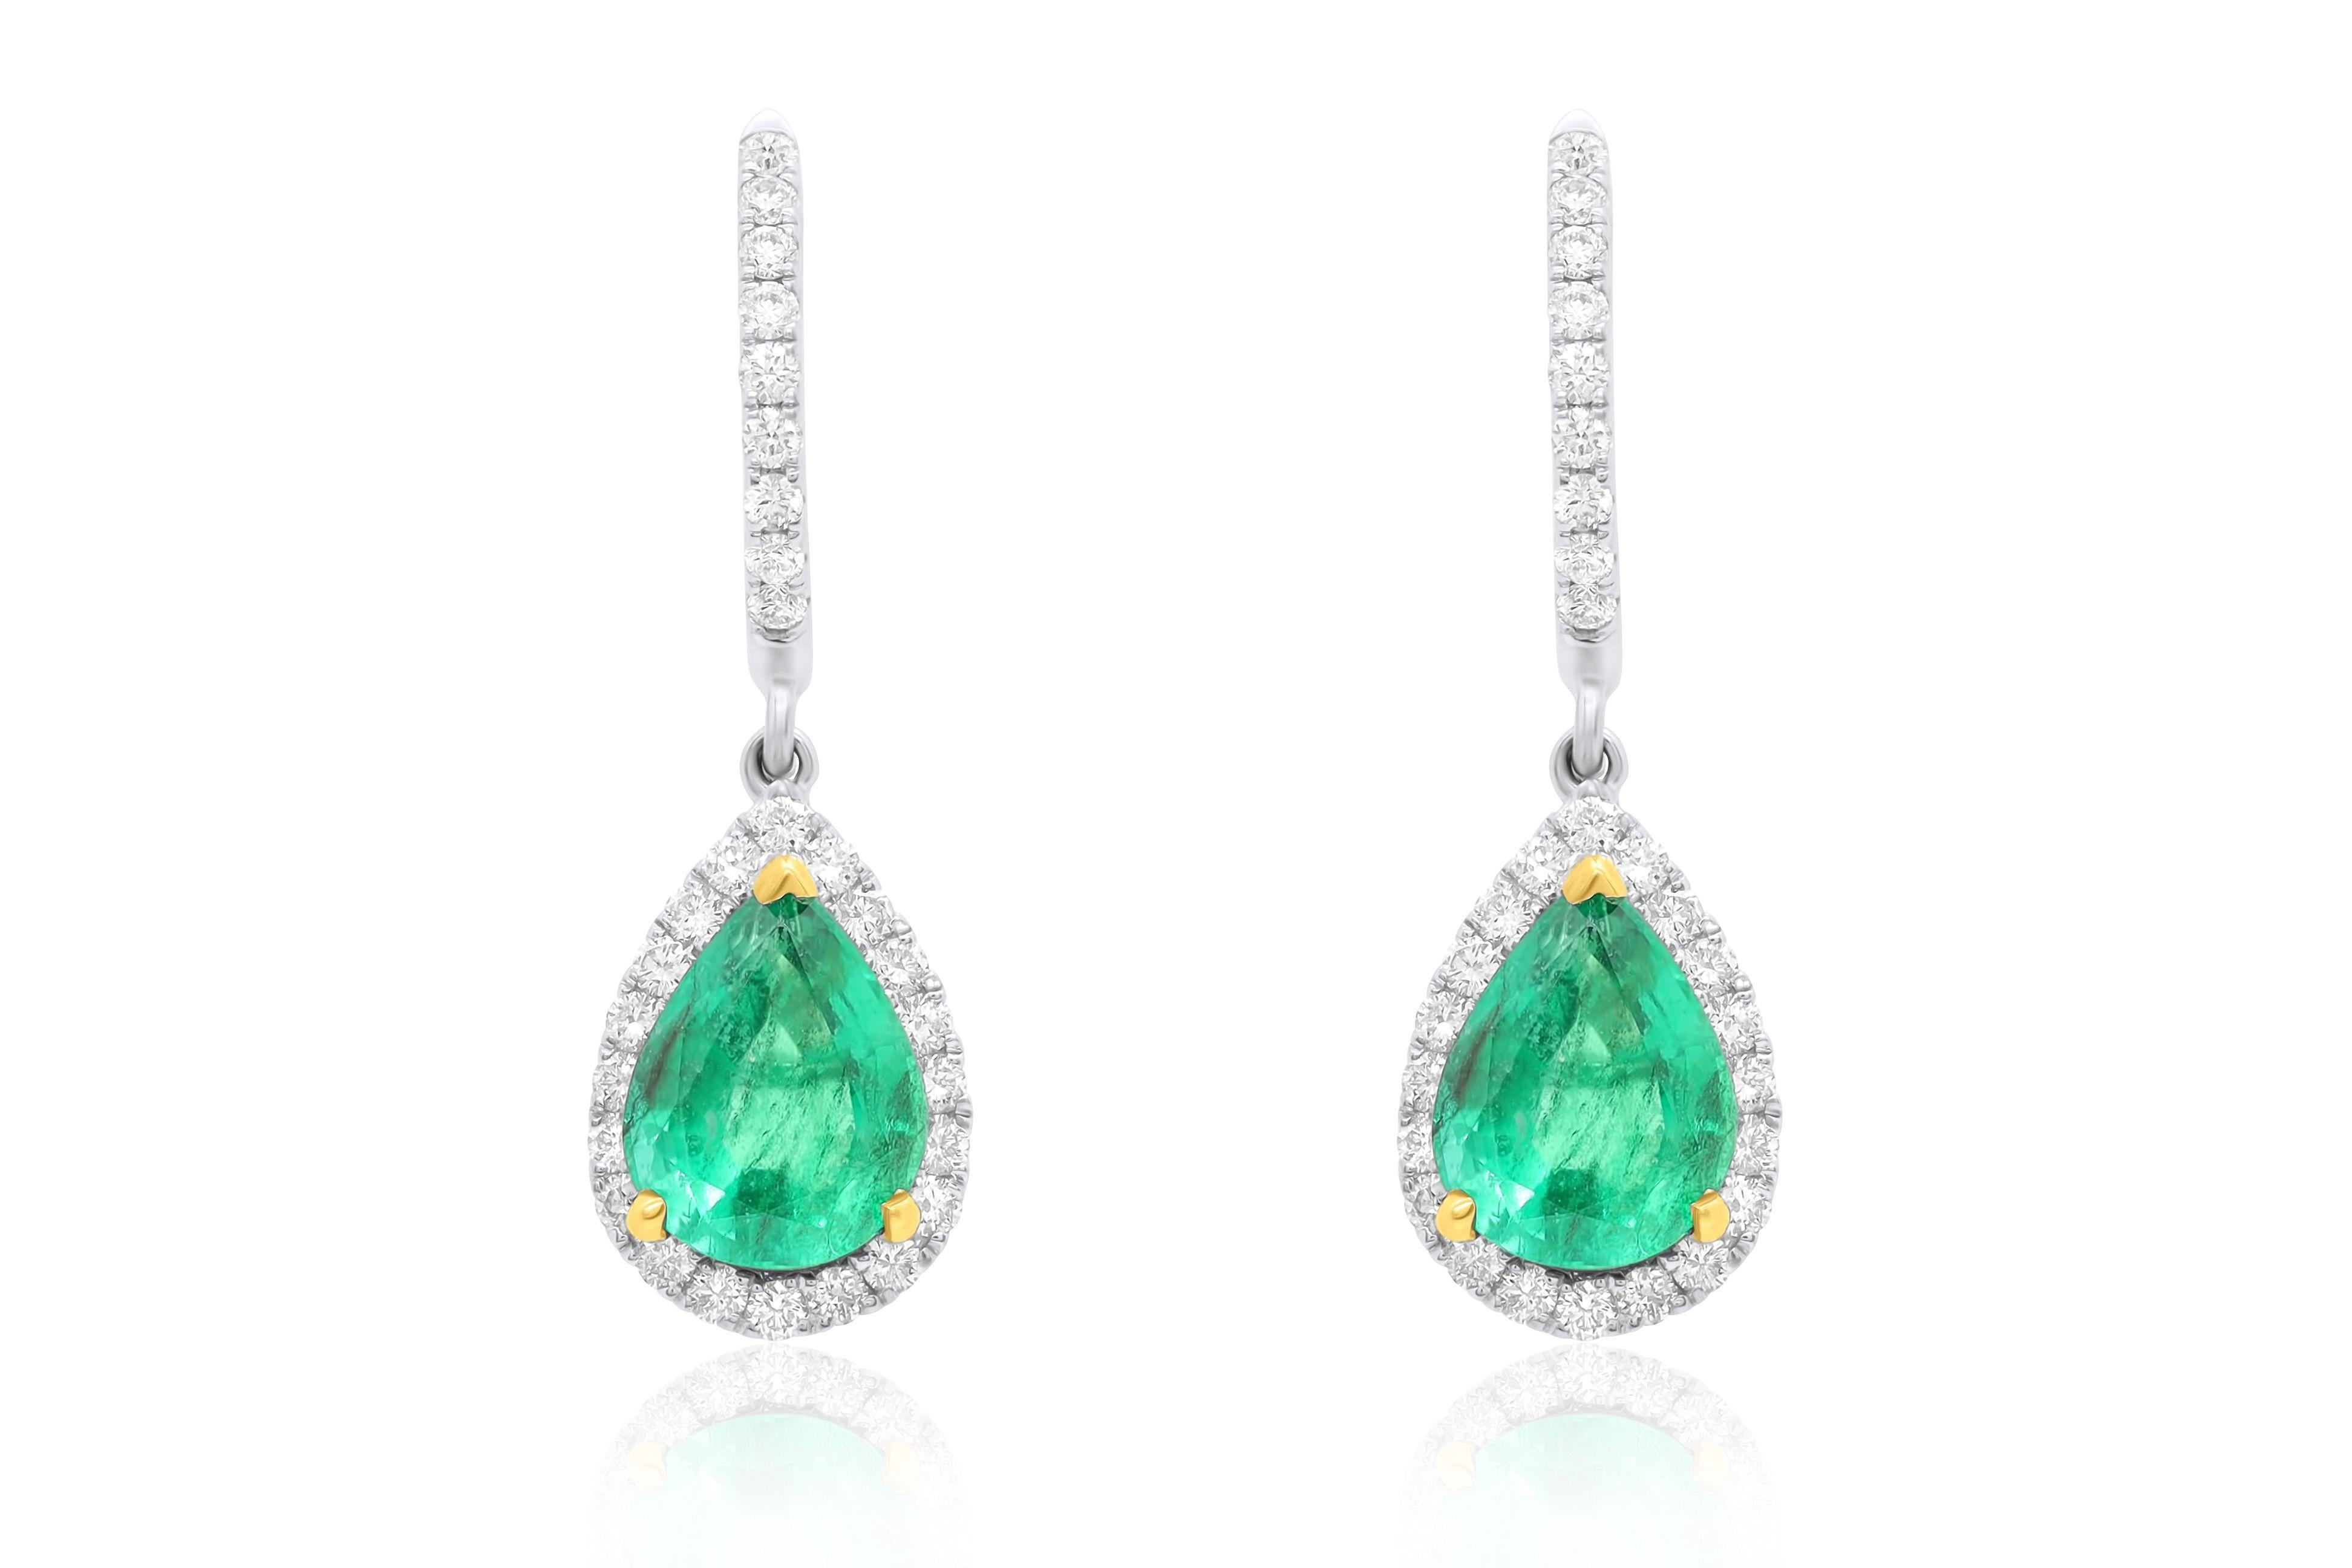 18kt white gold fashion earrings center stone emerald pear shape 2.88 cts with 0.70 cts diamond setting.